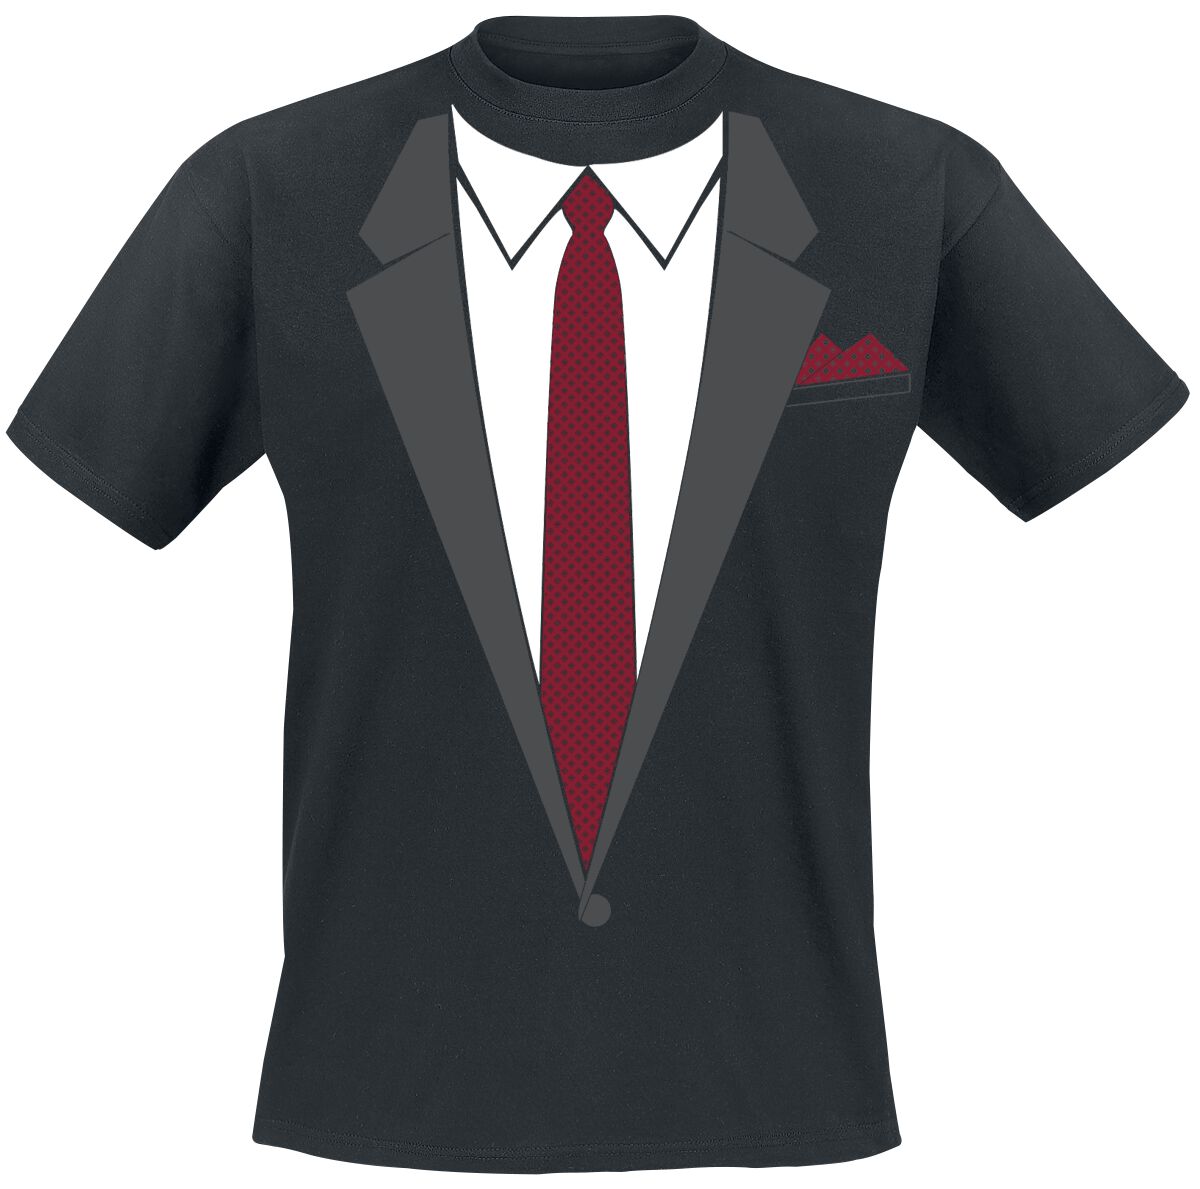 Jacket with Tie, Alcohol & Party T-shirt